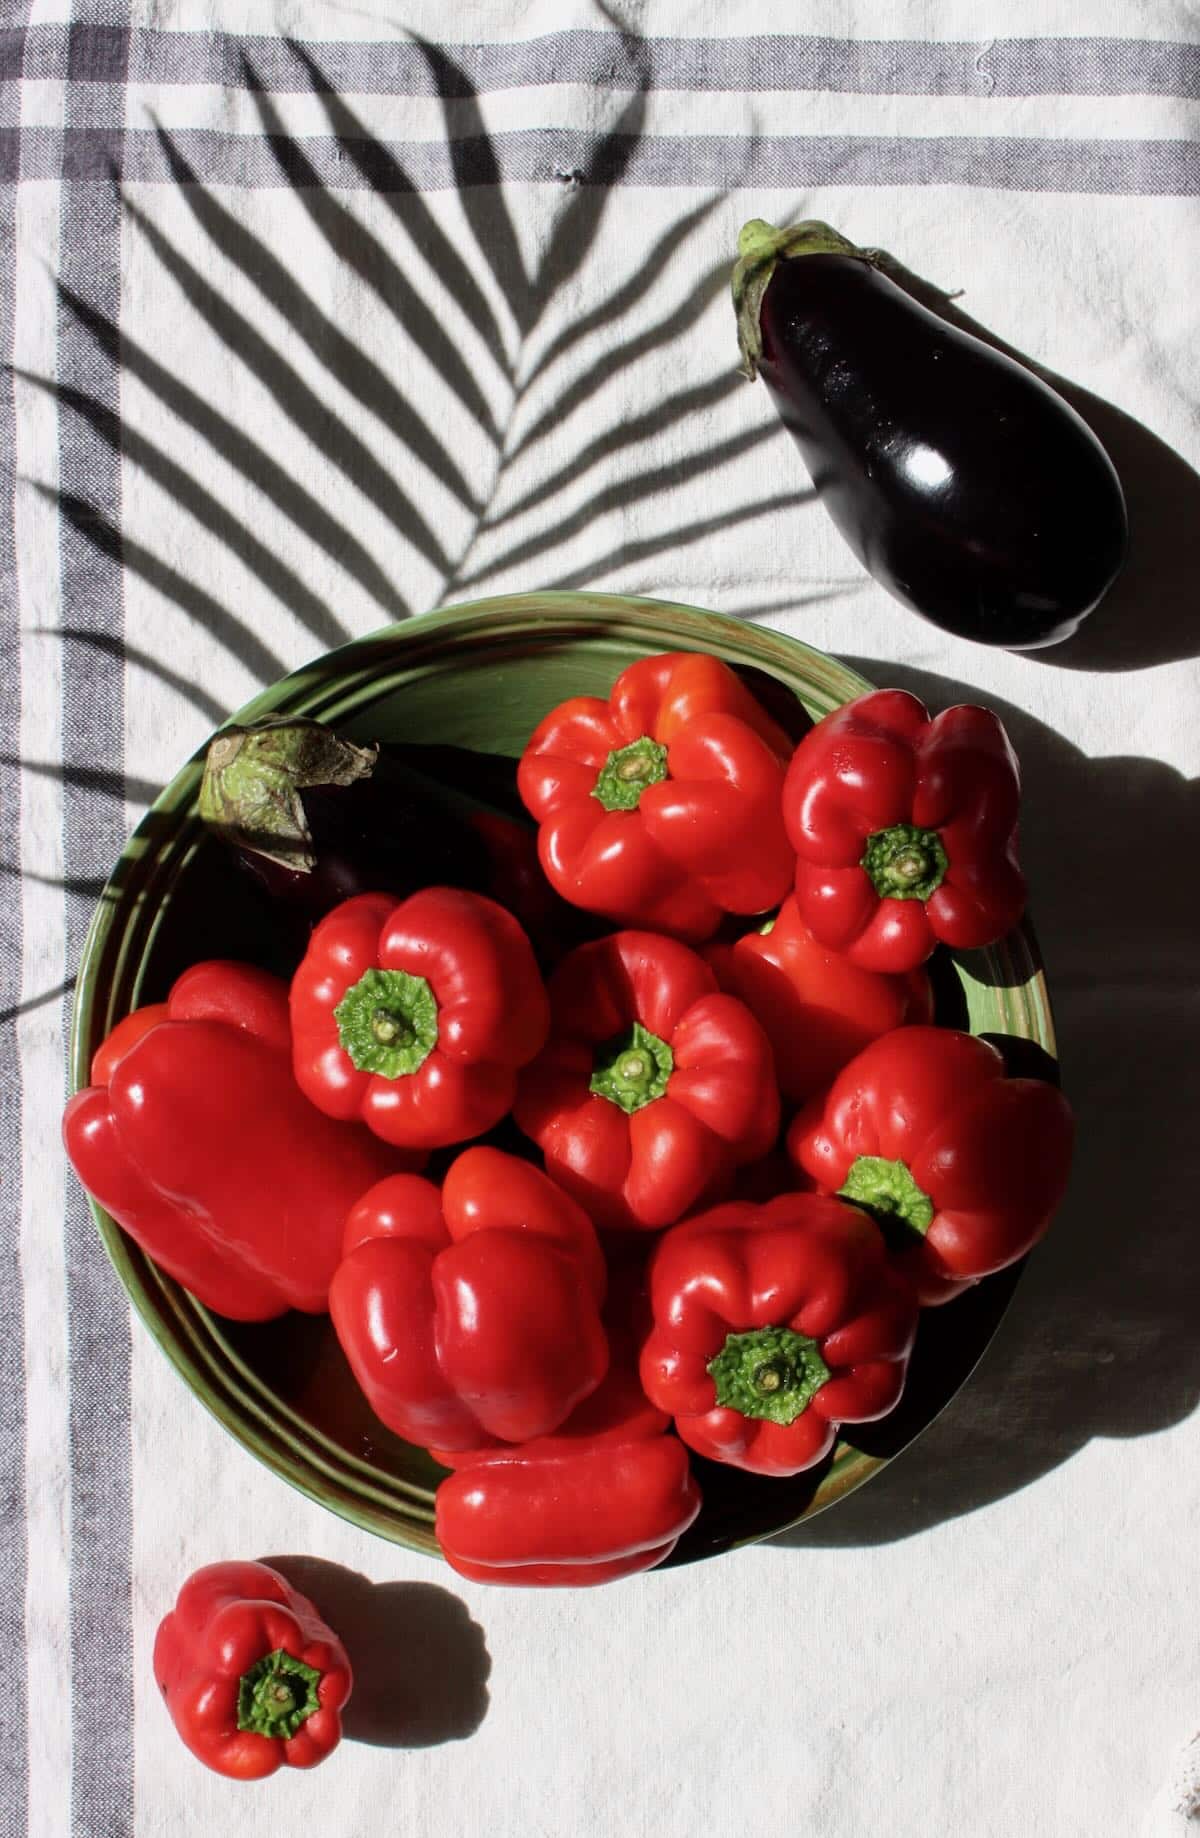 red bell peppers + eggplants